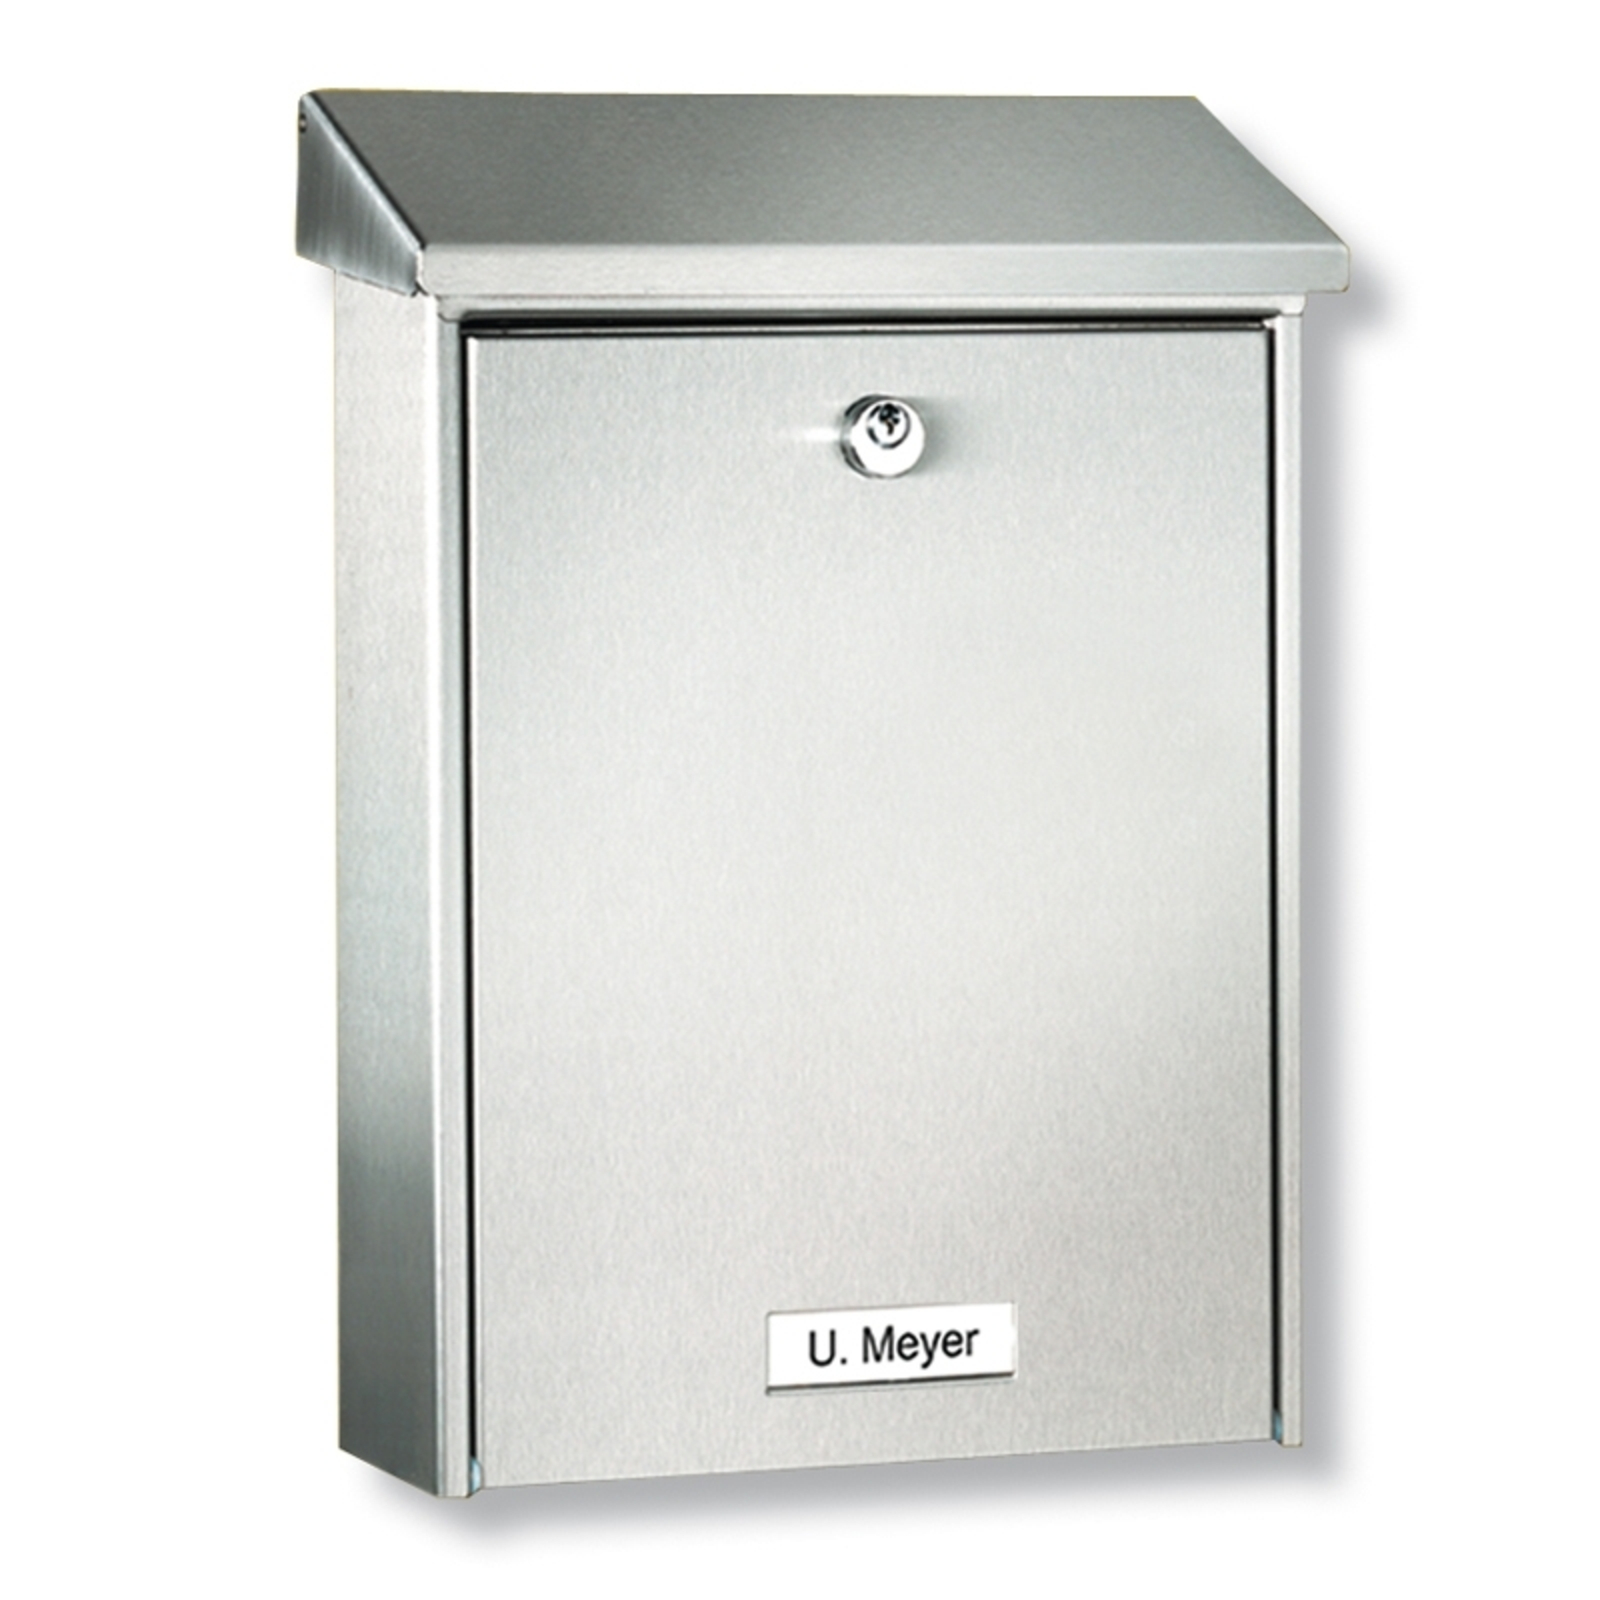 HANNOVER letter box with protective coating